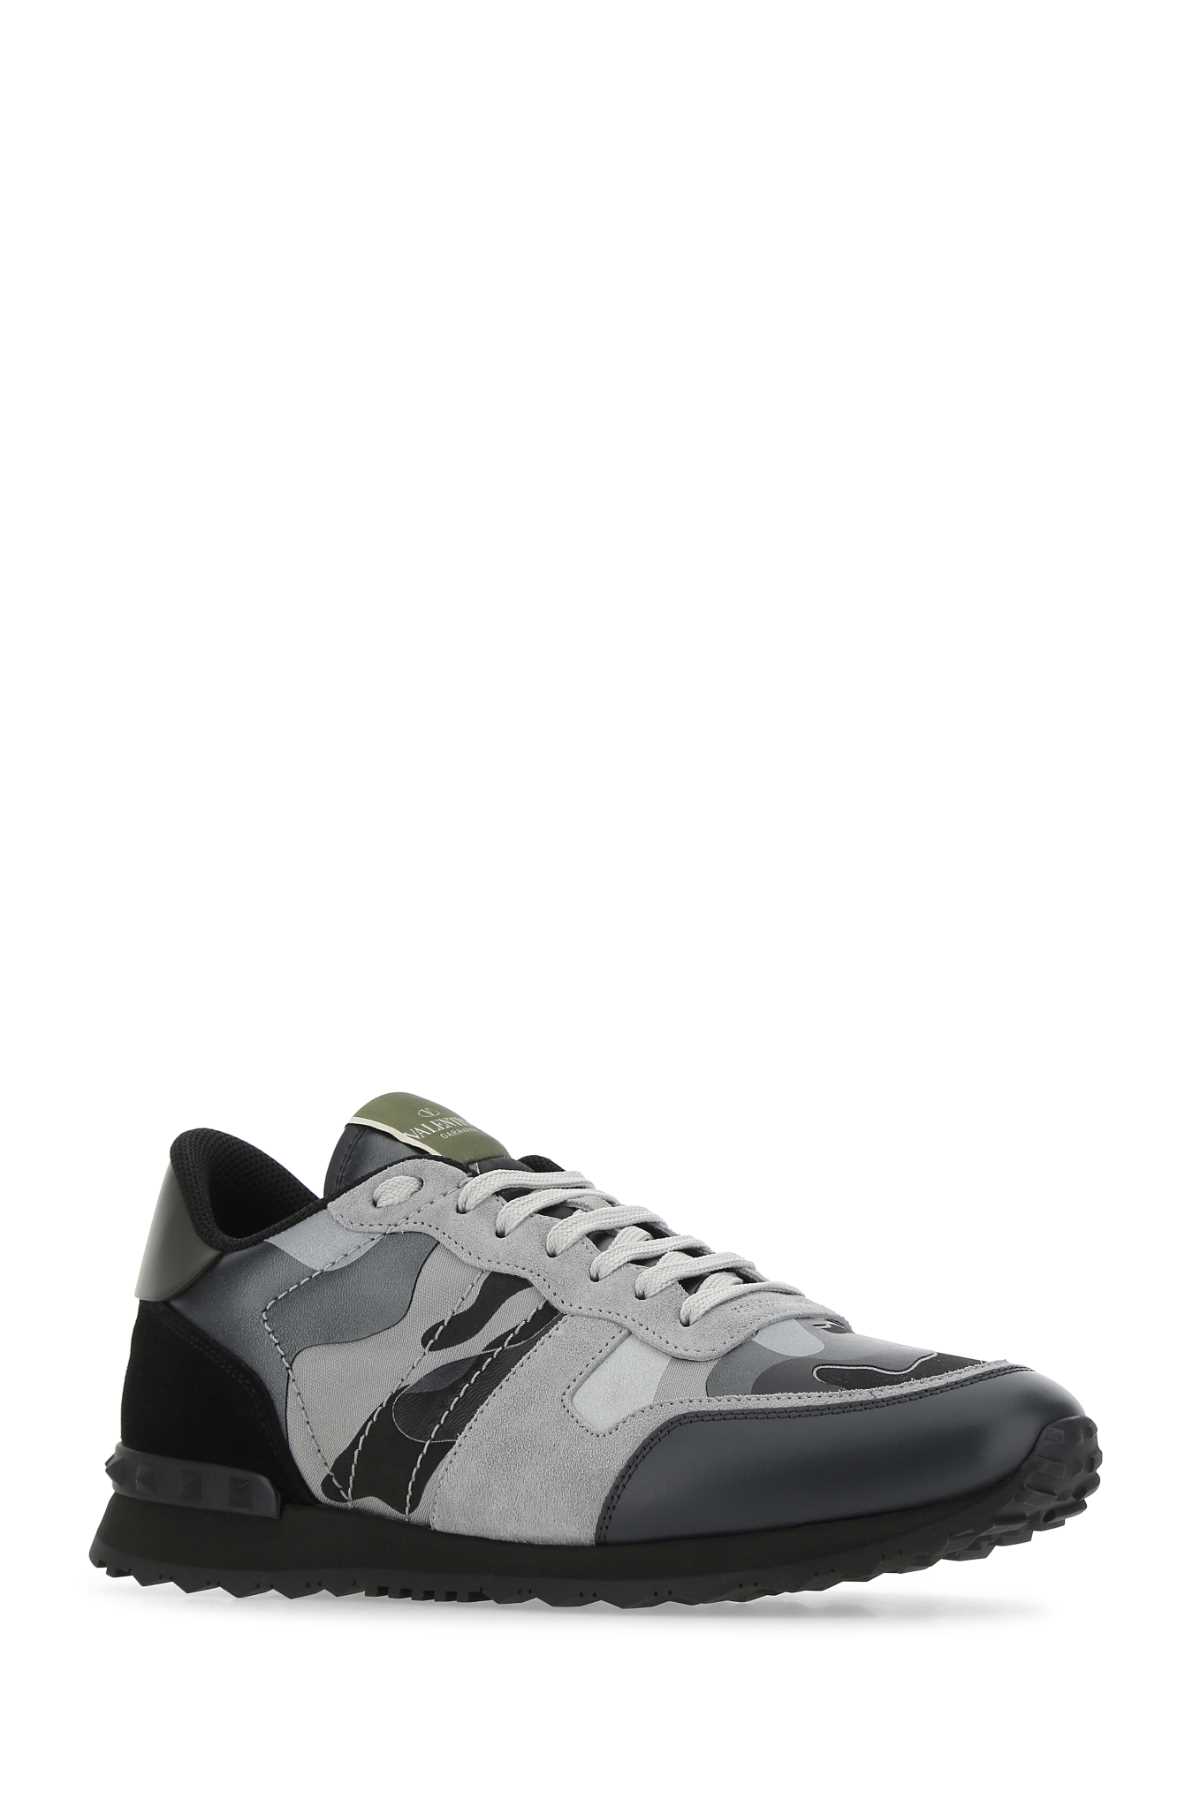 Valentino Garavani Multicolor Fabric And Nappa Leather Rockrunner Camouflage Trainers In Grirutpgrenedkgreoline